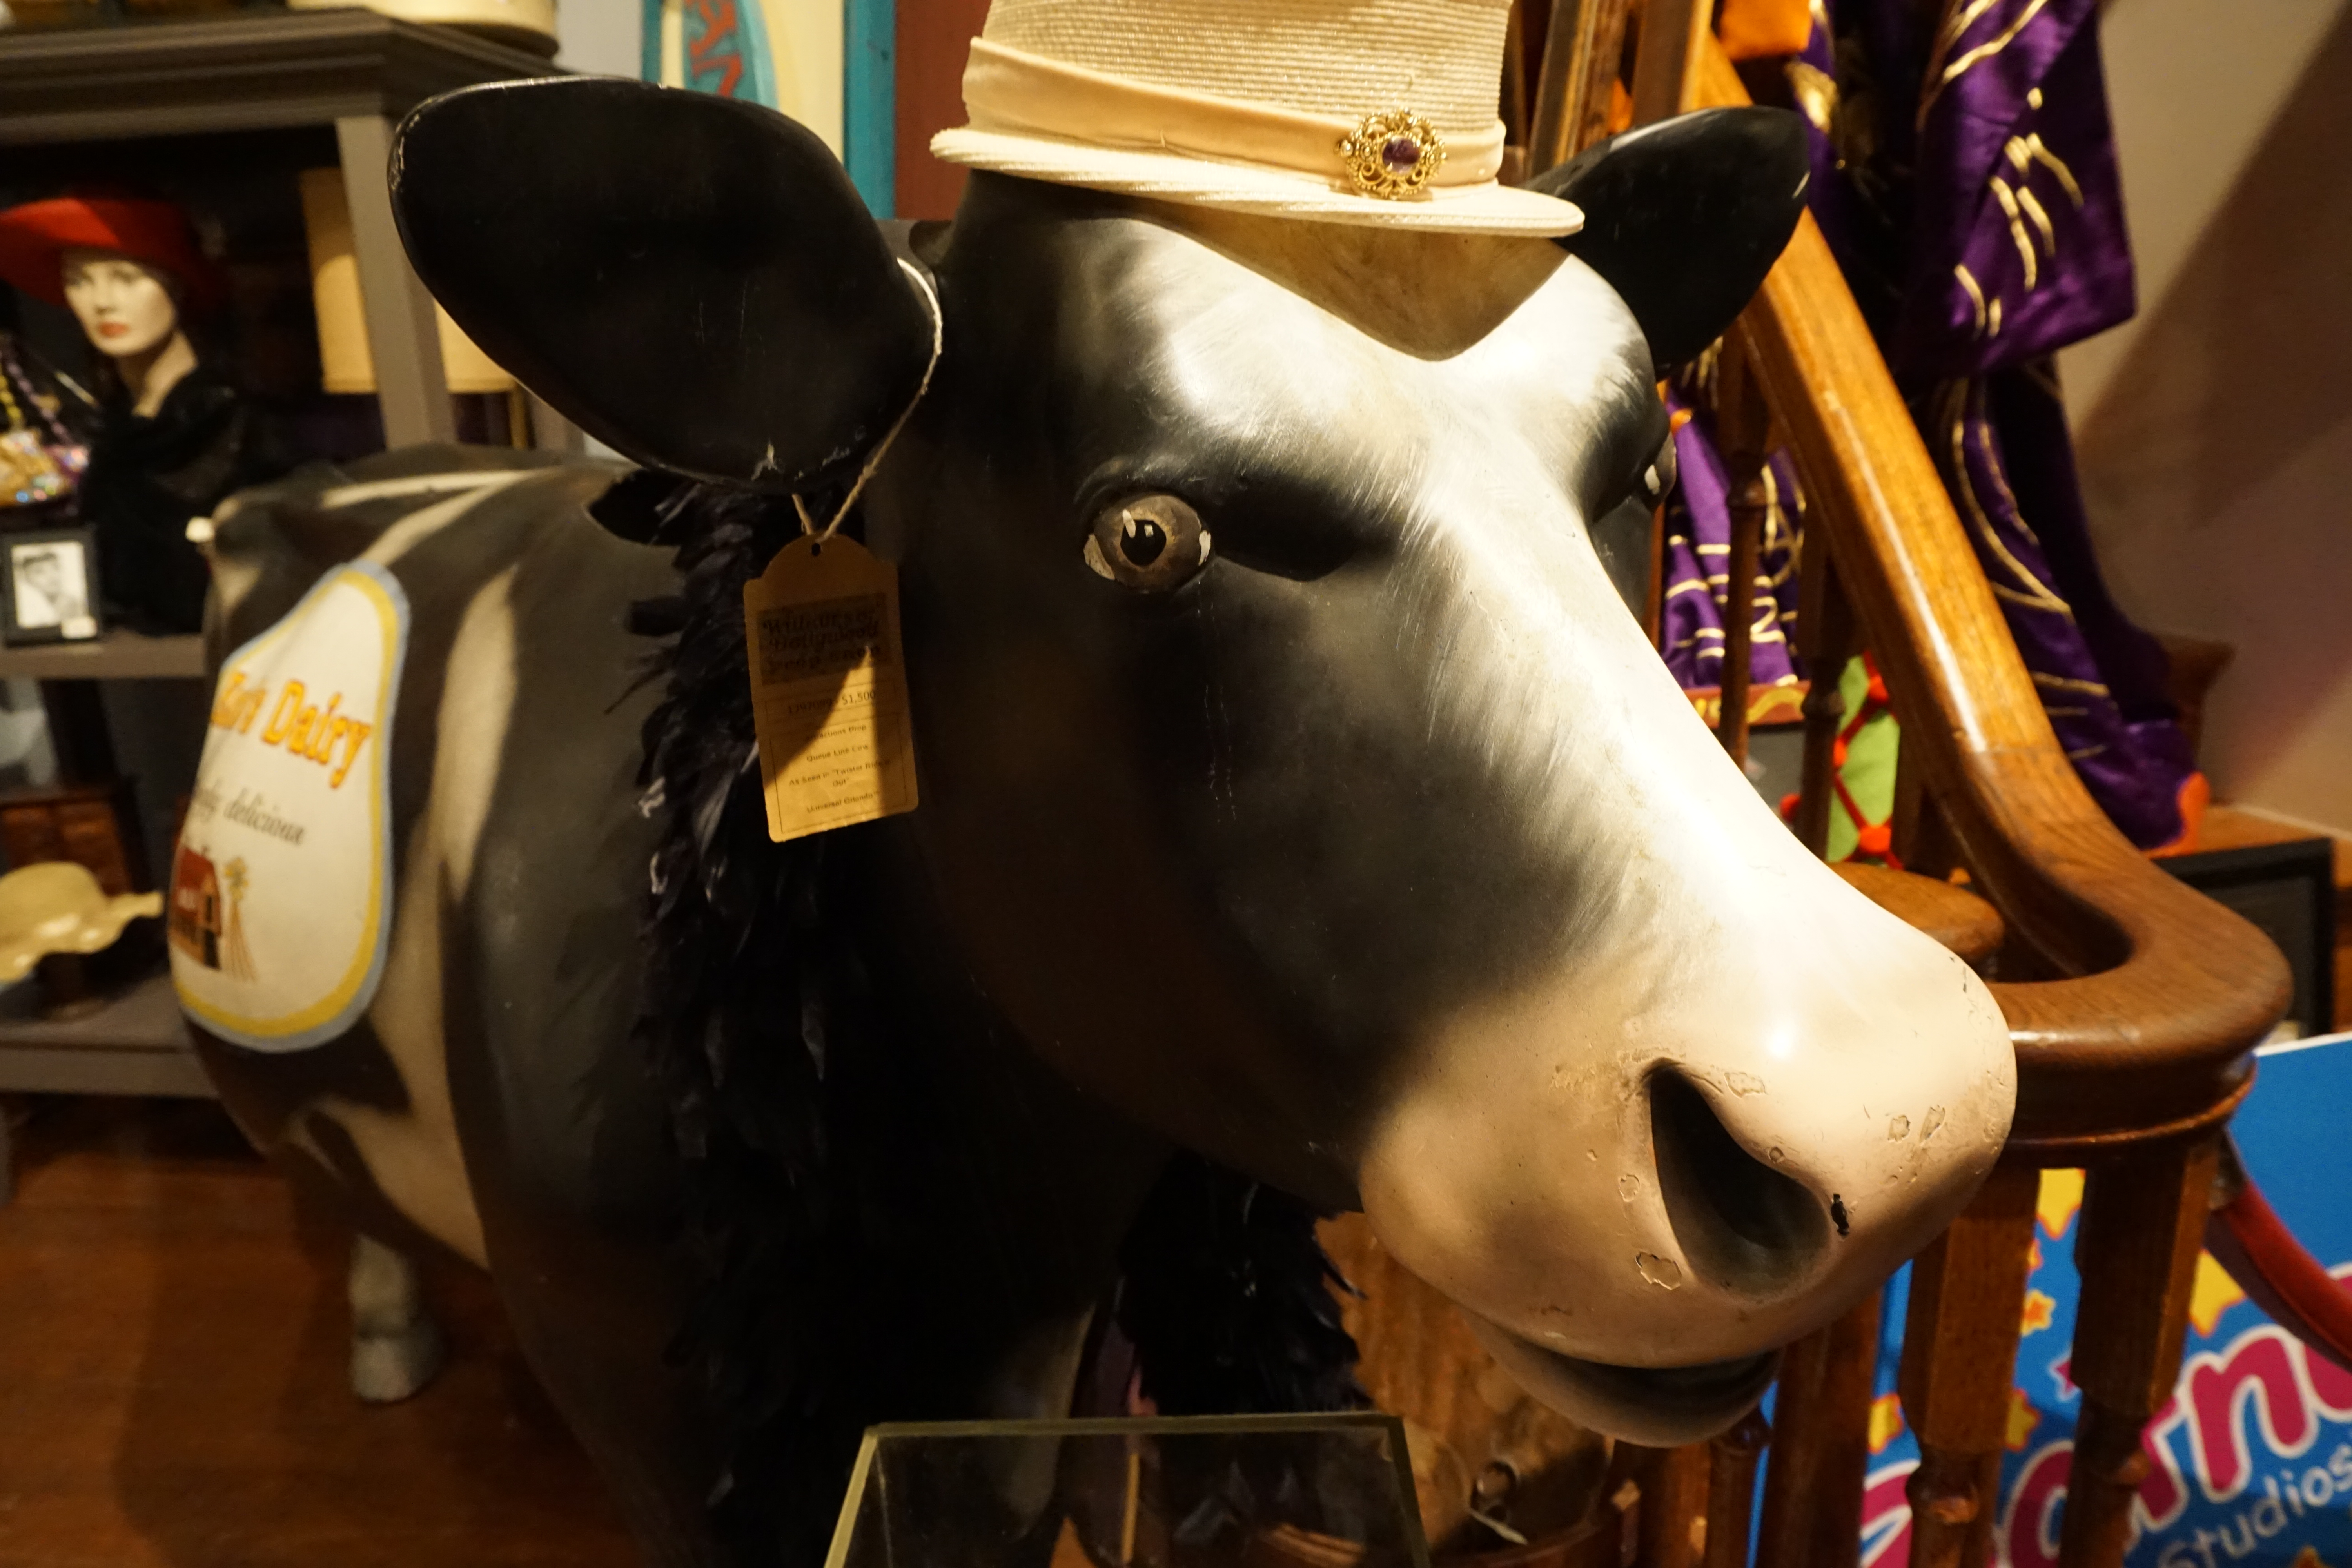 Cow prop at Williams of Hollywood Prop Shop at Universal Studios Orlando - by unofficialuniversal.com.